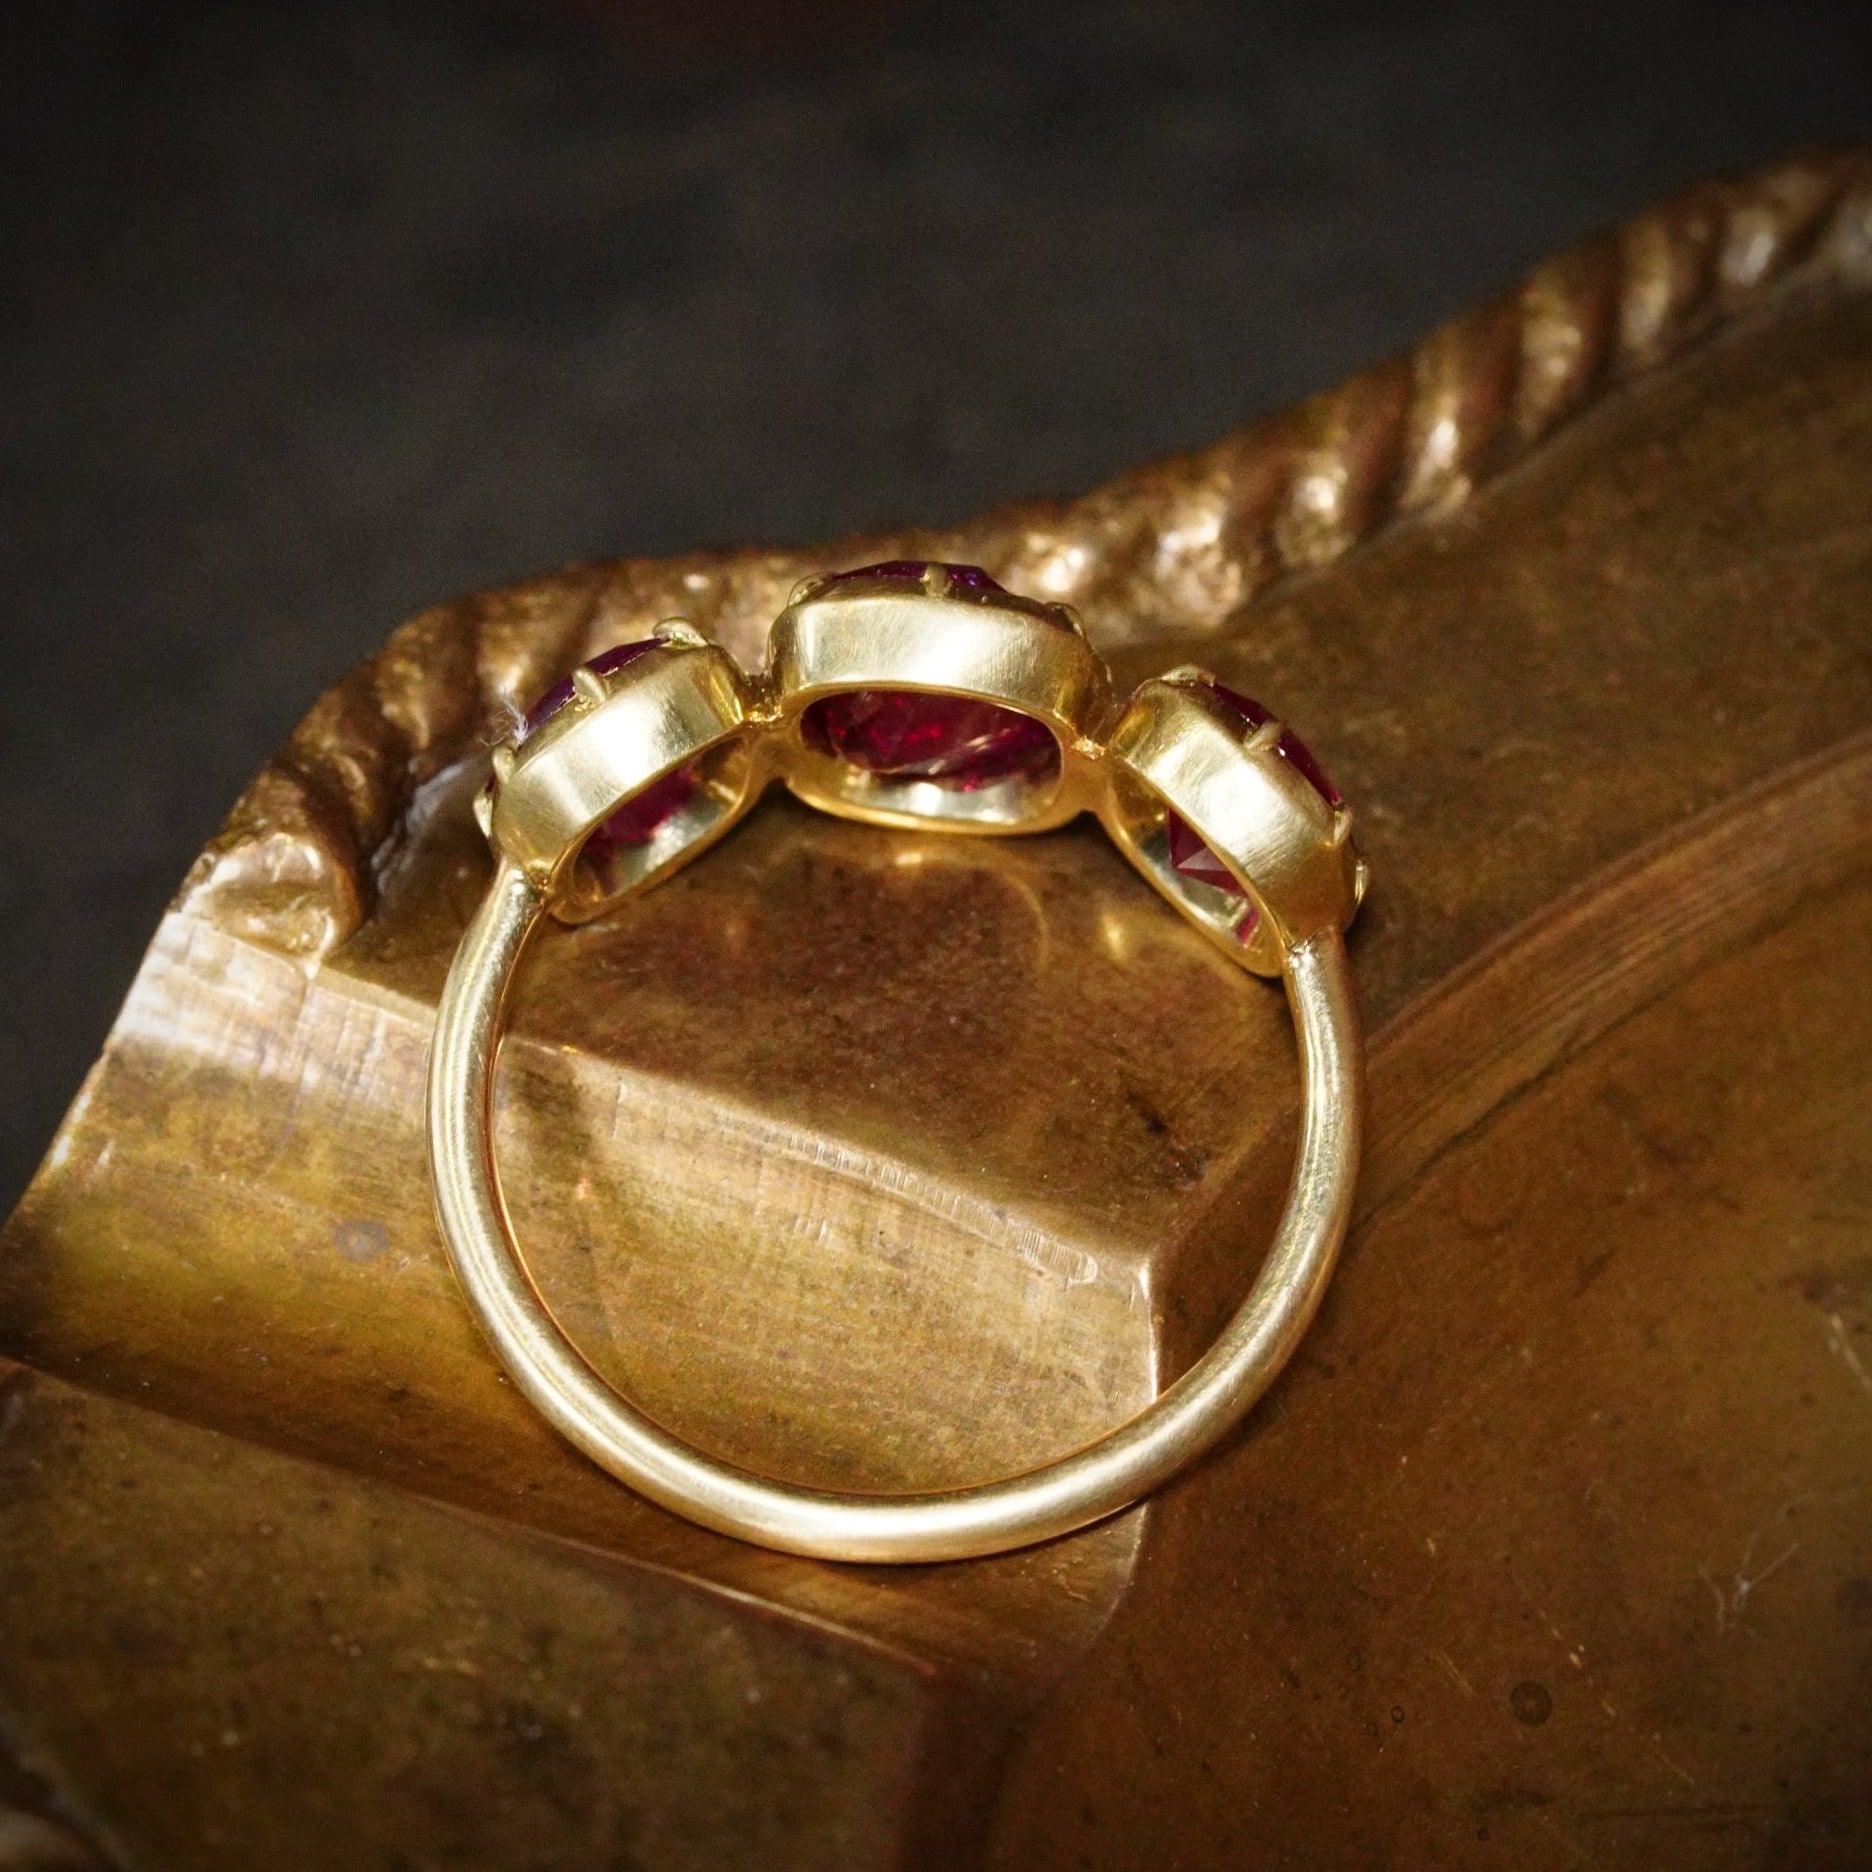 Statement piece: Romantic Victorian-style Burma No Heat Ruby Collet Ring by Anup Jogani